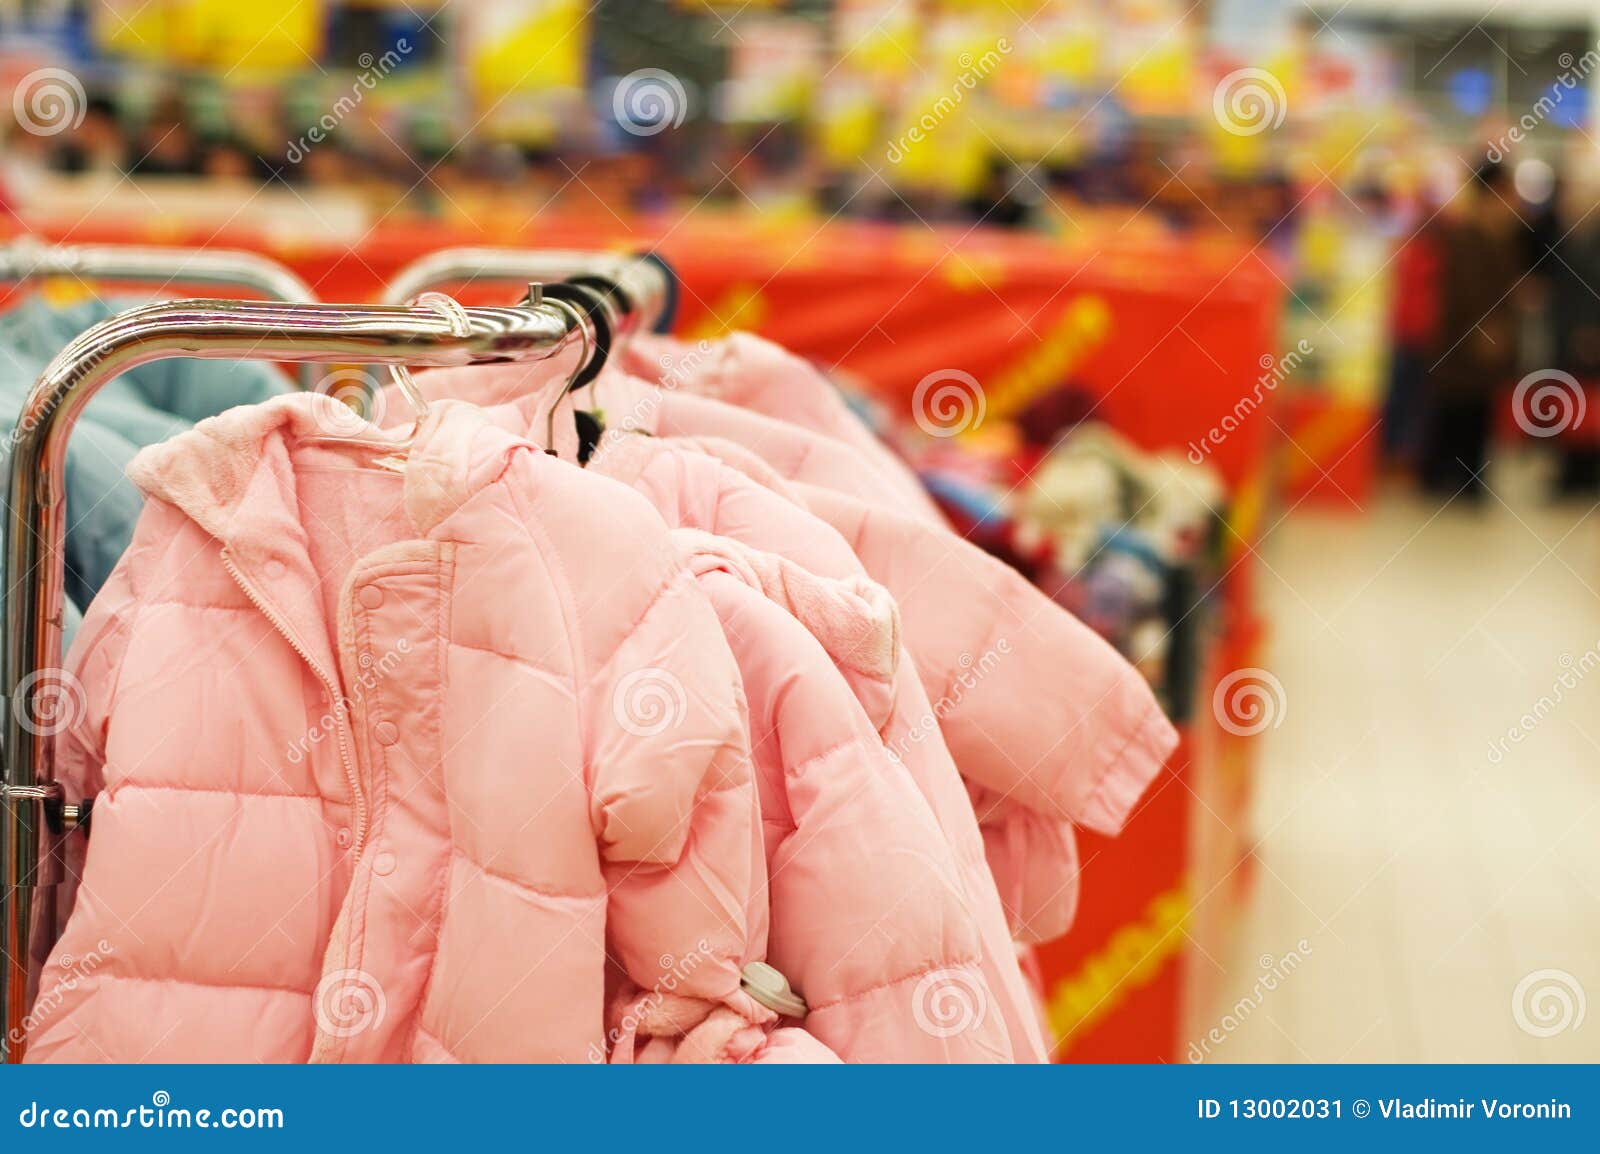 Children Clothes Sale in Store Stock Image - Image of supermarket ...